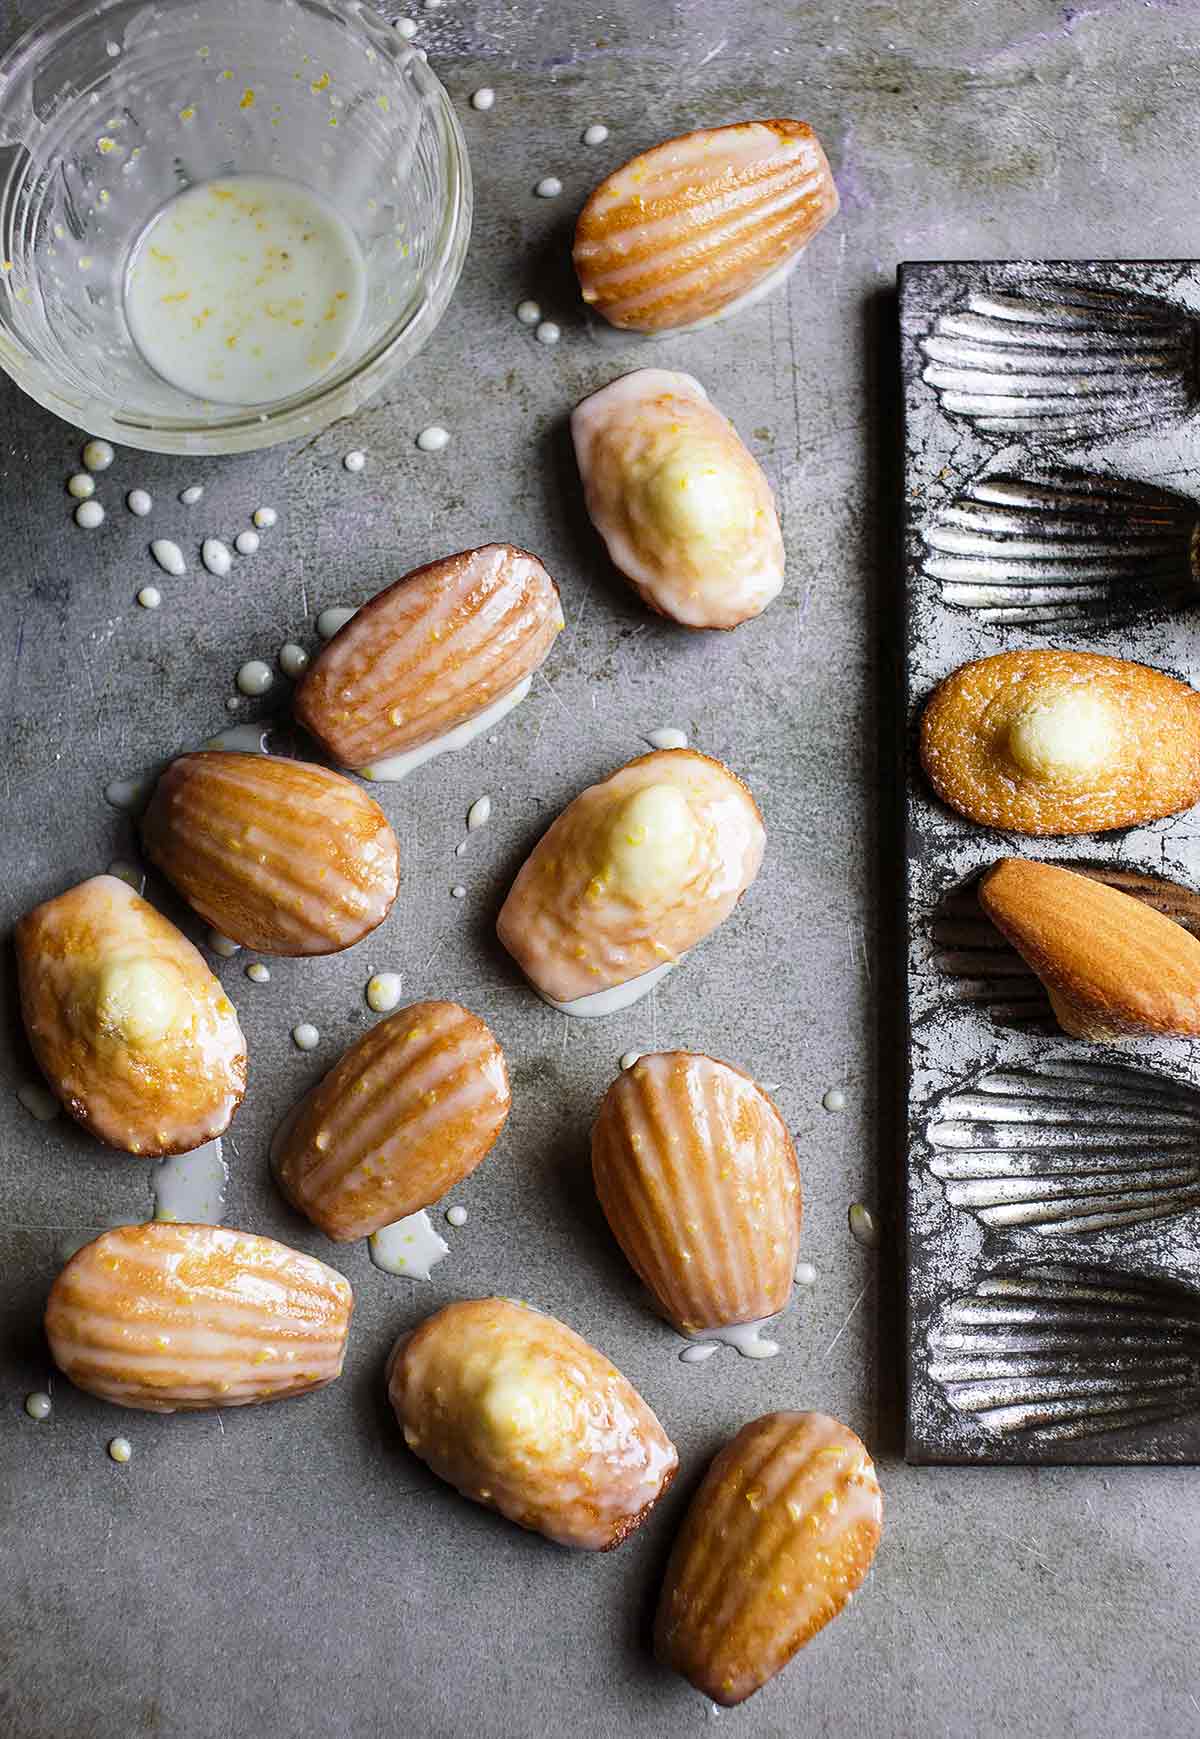 Several lemon madeleines next to a madeleine pan and a bowl of lemon glaze nearby.